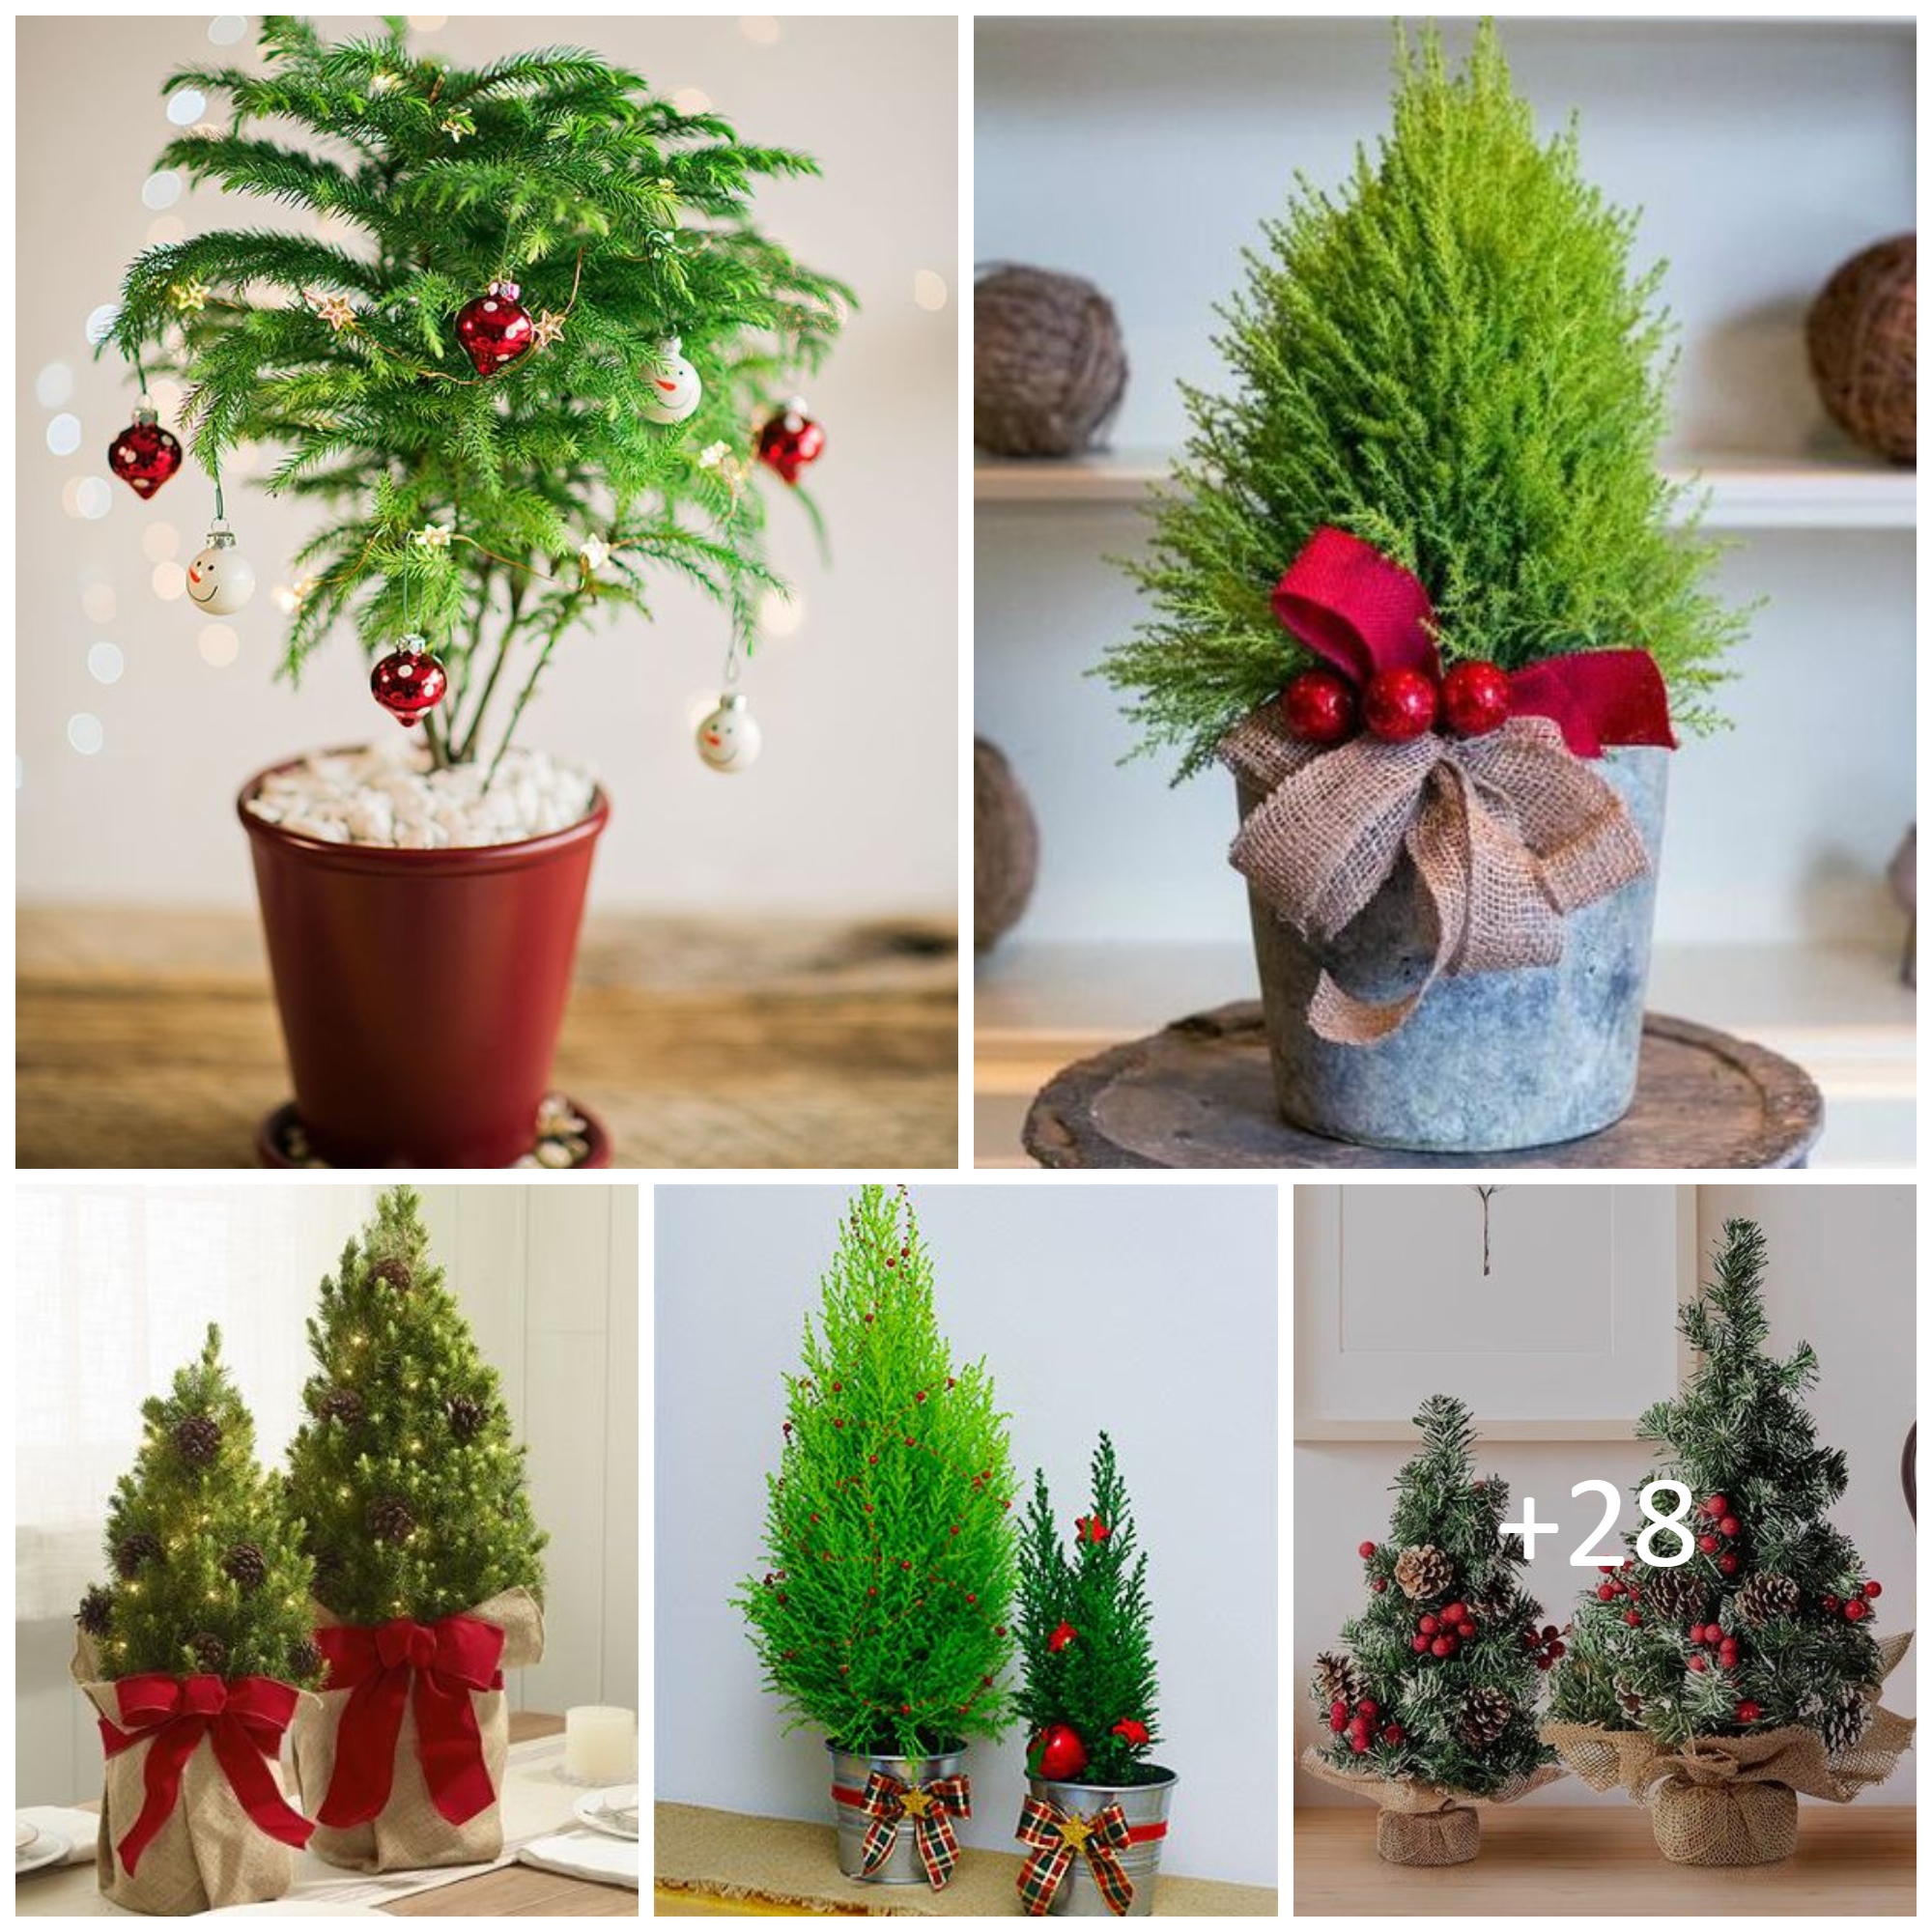 Tabletop Christmas Trees to Decorate Your Space